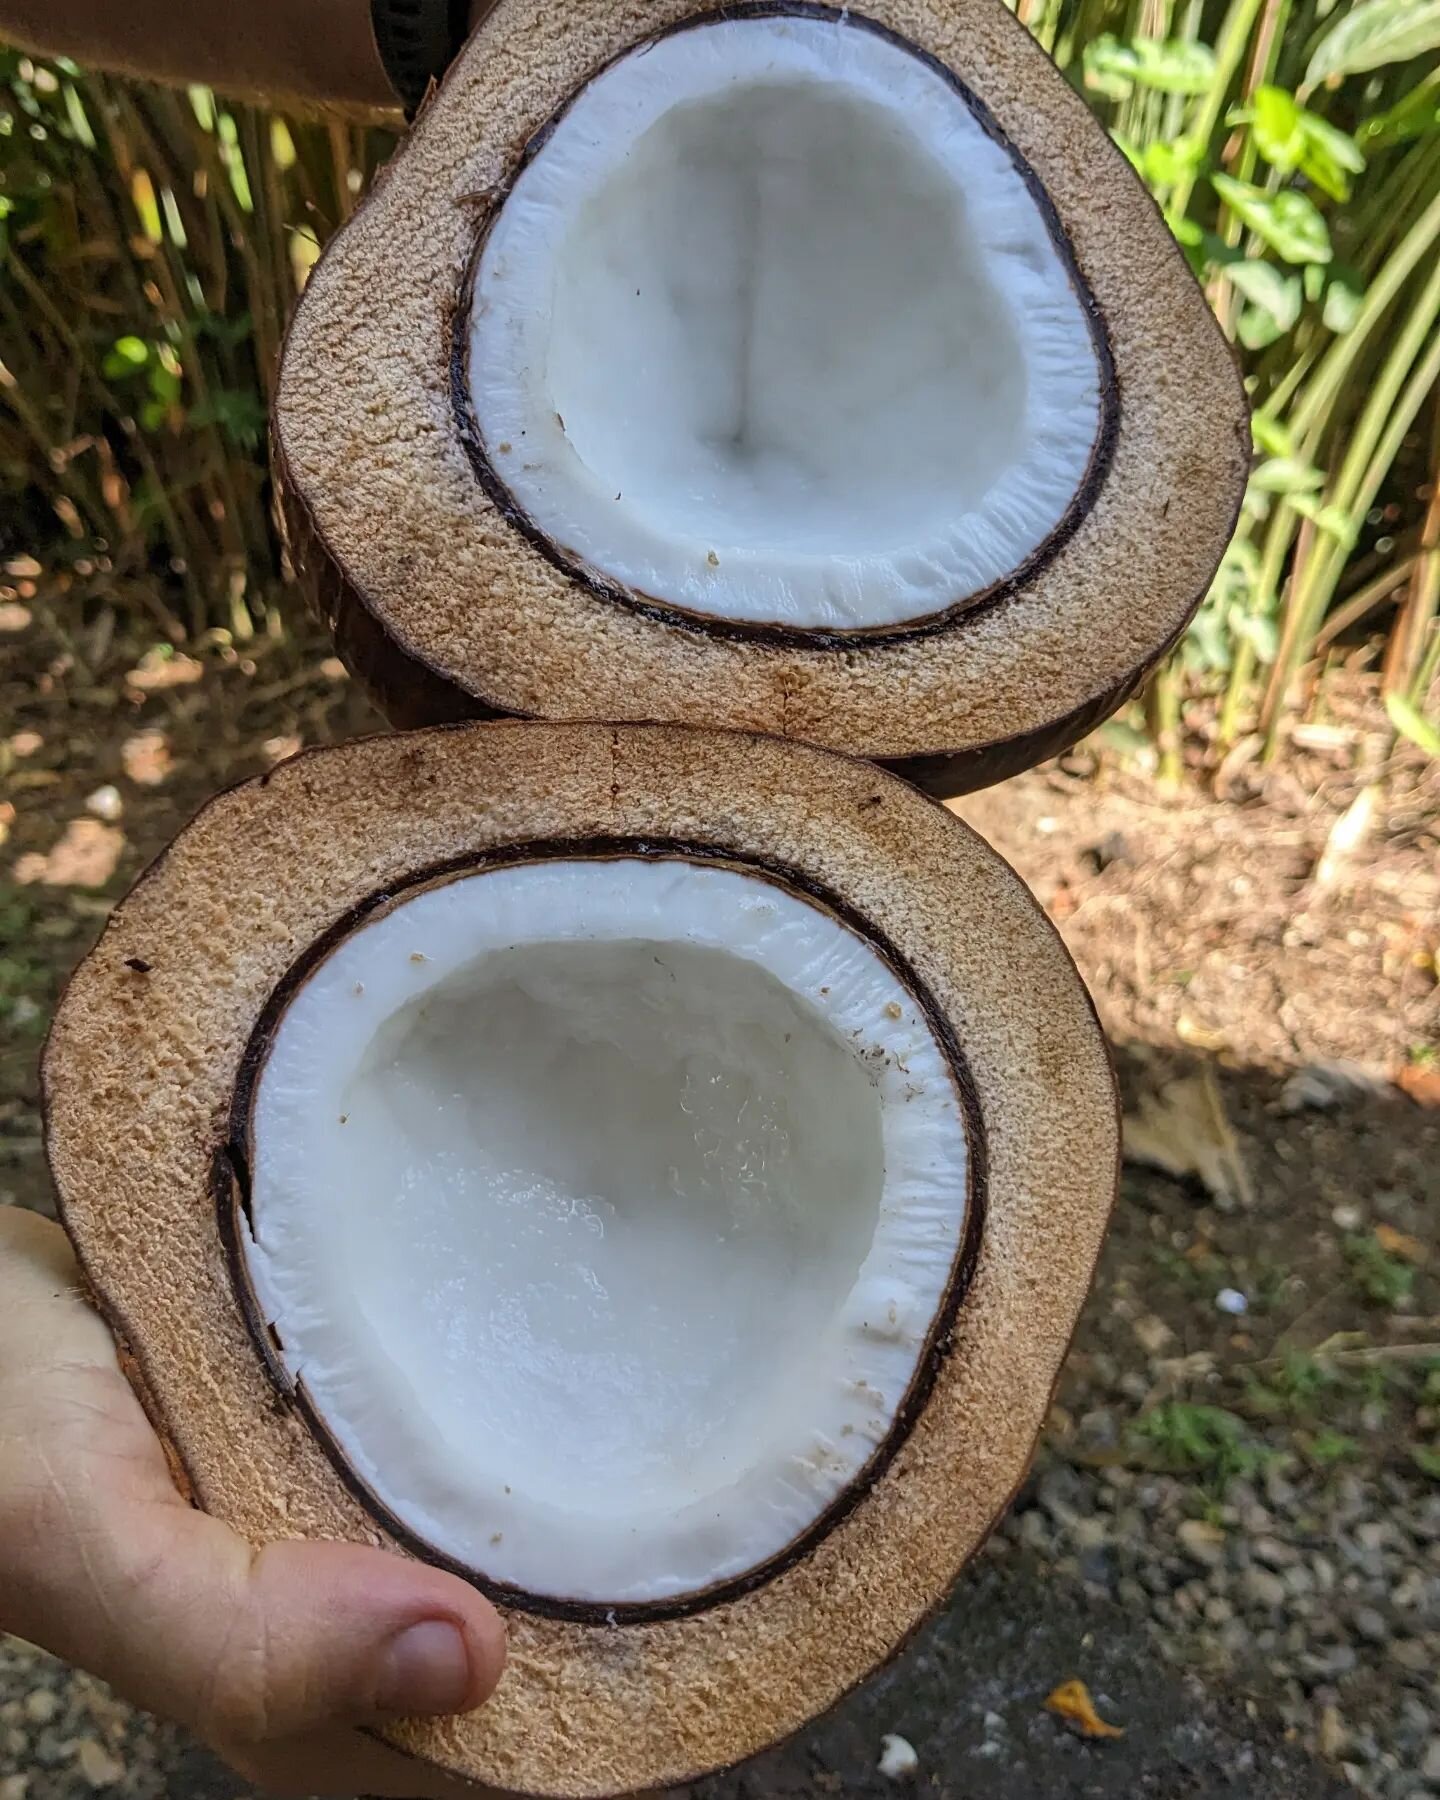 Coconut 🥥 (Cocos nucifera) from the Arecaseae (palms) family, we really love this tropical plant.  From refreshing water to delicious snacks. Its fruit has the second biggest seed in the world, a seed that has a lot to offer.

Green / young coconut 